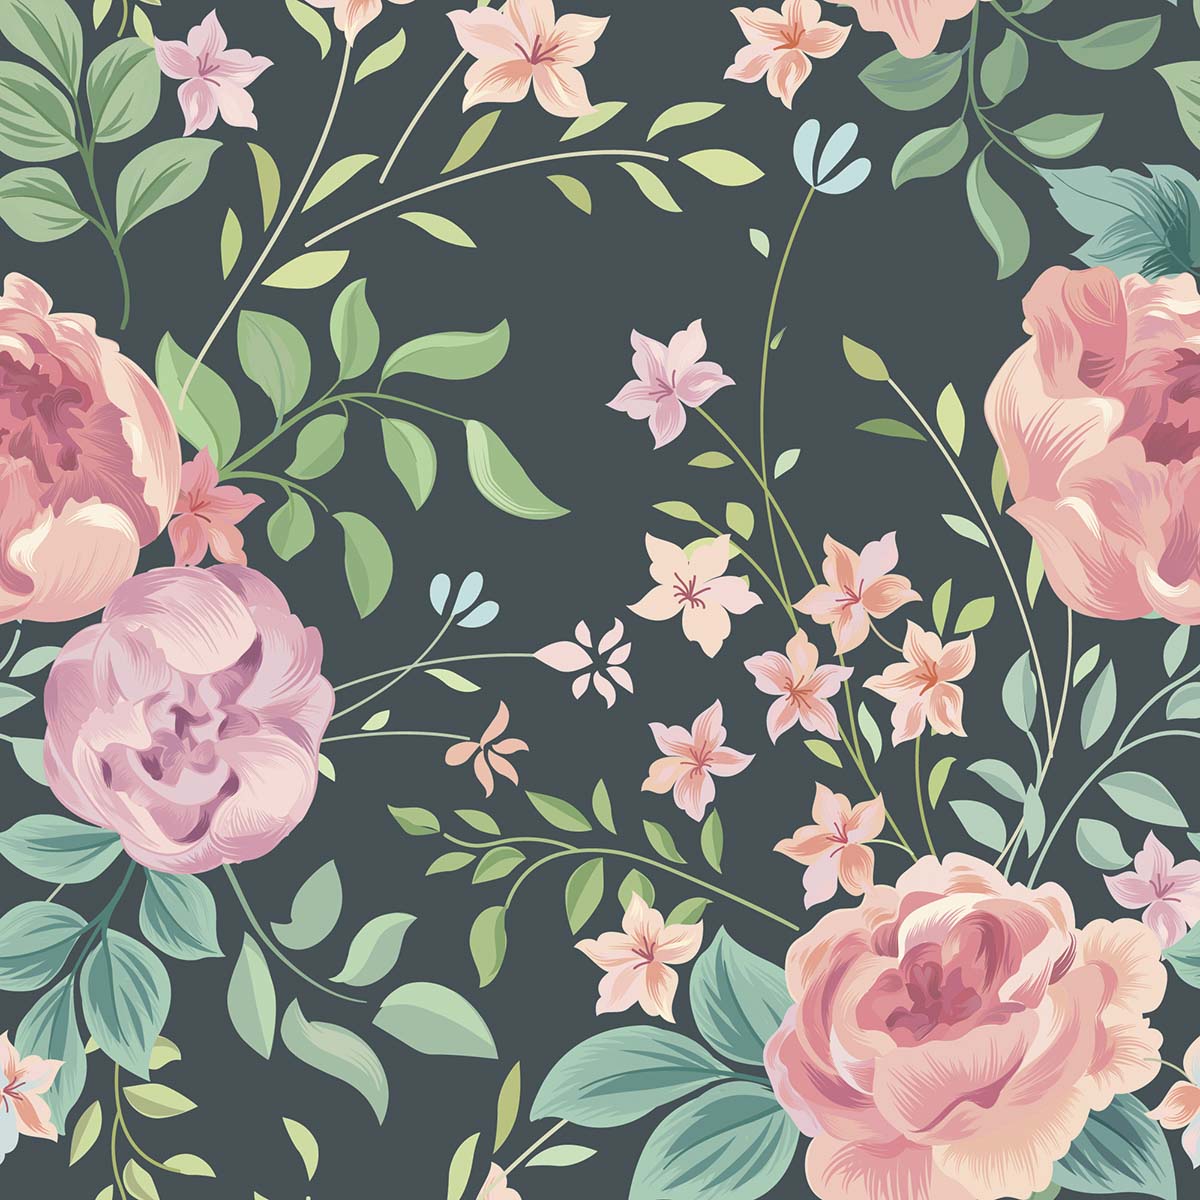 A floral pattern with pink flowers and green leaves